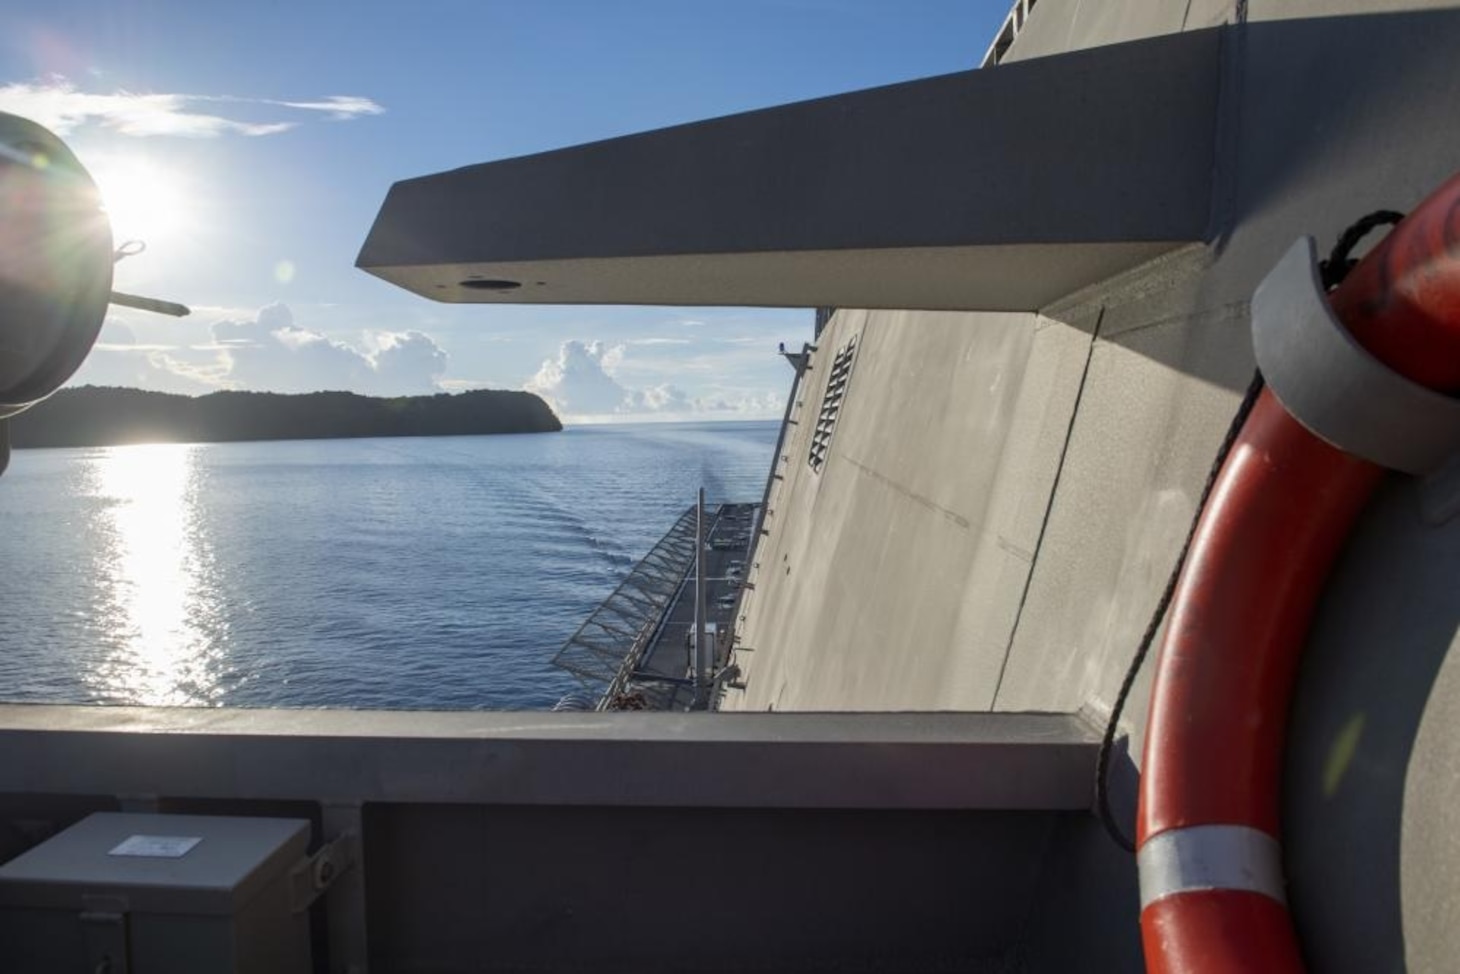 PALAU (Sept. 2, 2021) Independence-variant littoral combat ship USS Jackson (LCS 6) transits into Palau. Jackson, part of Destroyer Squadron Seven, is on a rotational deployment in the U.S. 7th Fleet area of operation to enhance interoperability with partners and serve as a ready-response force in support of a free and open Indo-Pacific region. (U.S. Navy photo by Mass Communication Specialist 3rd Class Kelsey S. Culbertson)